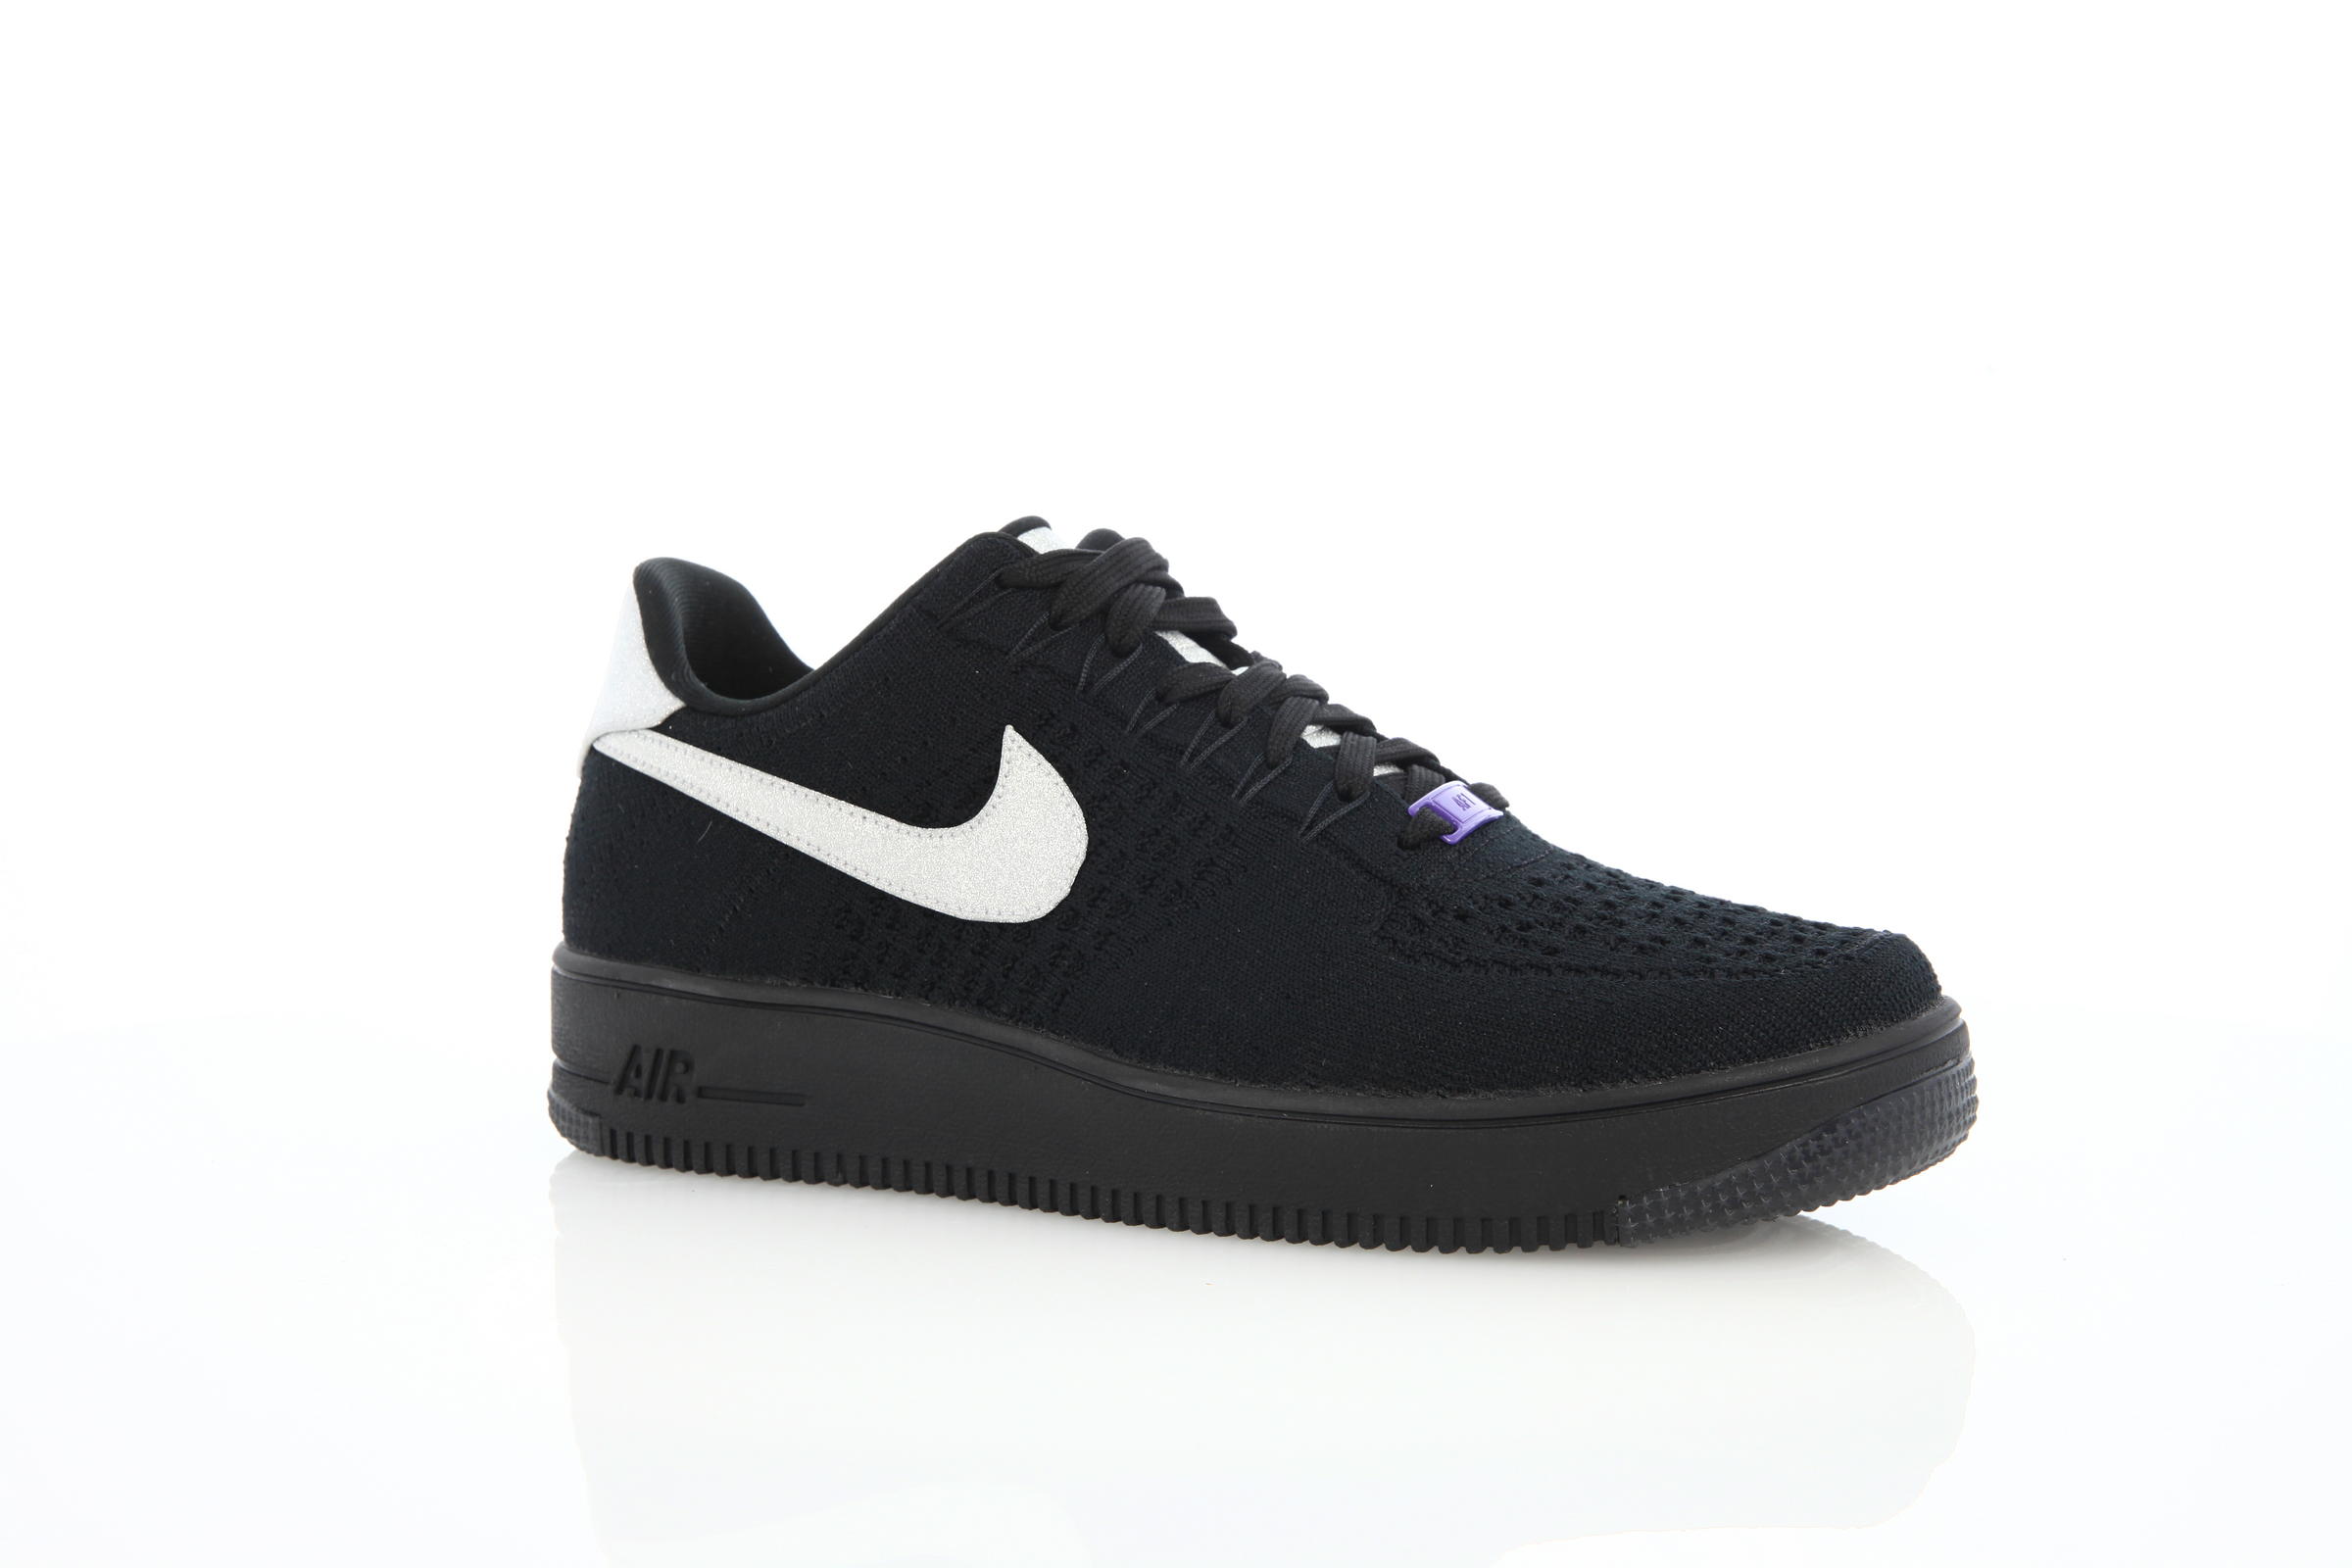 Nike Air Force 1 Flyknit Low AS QS "Black"